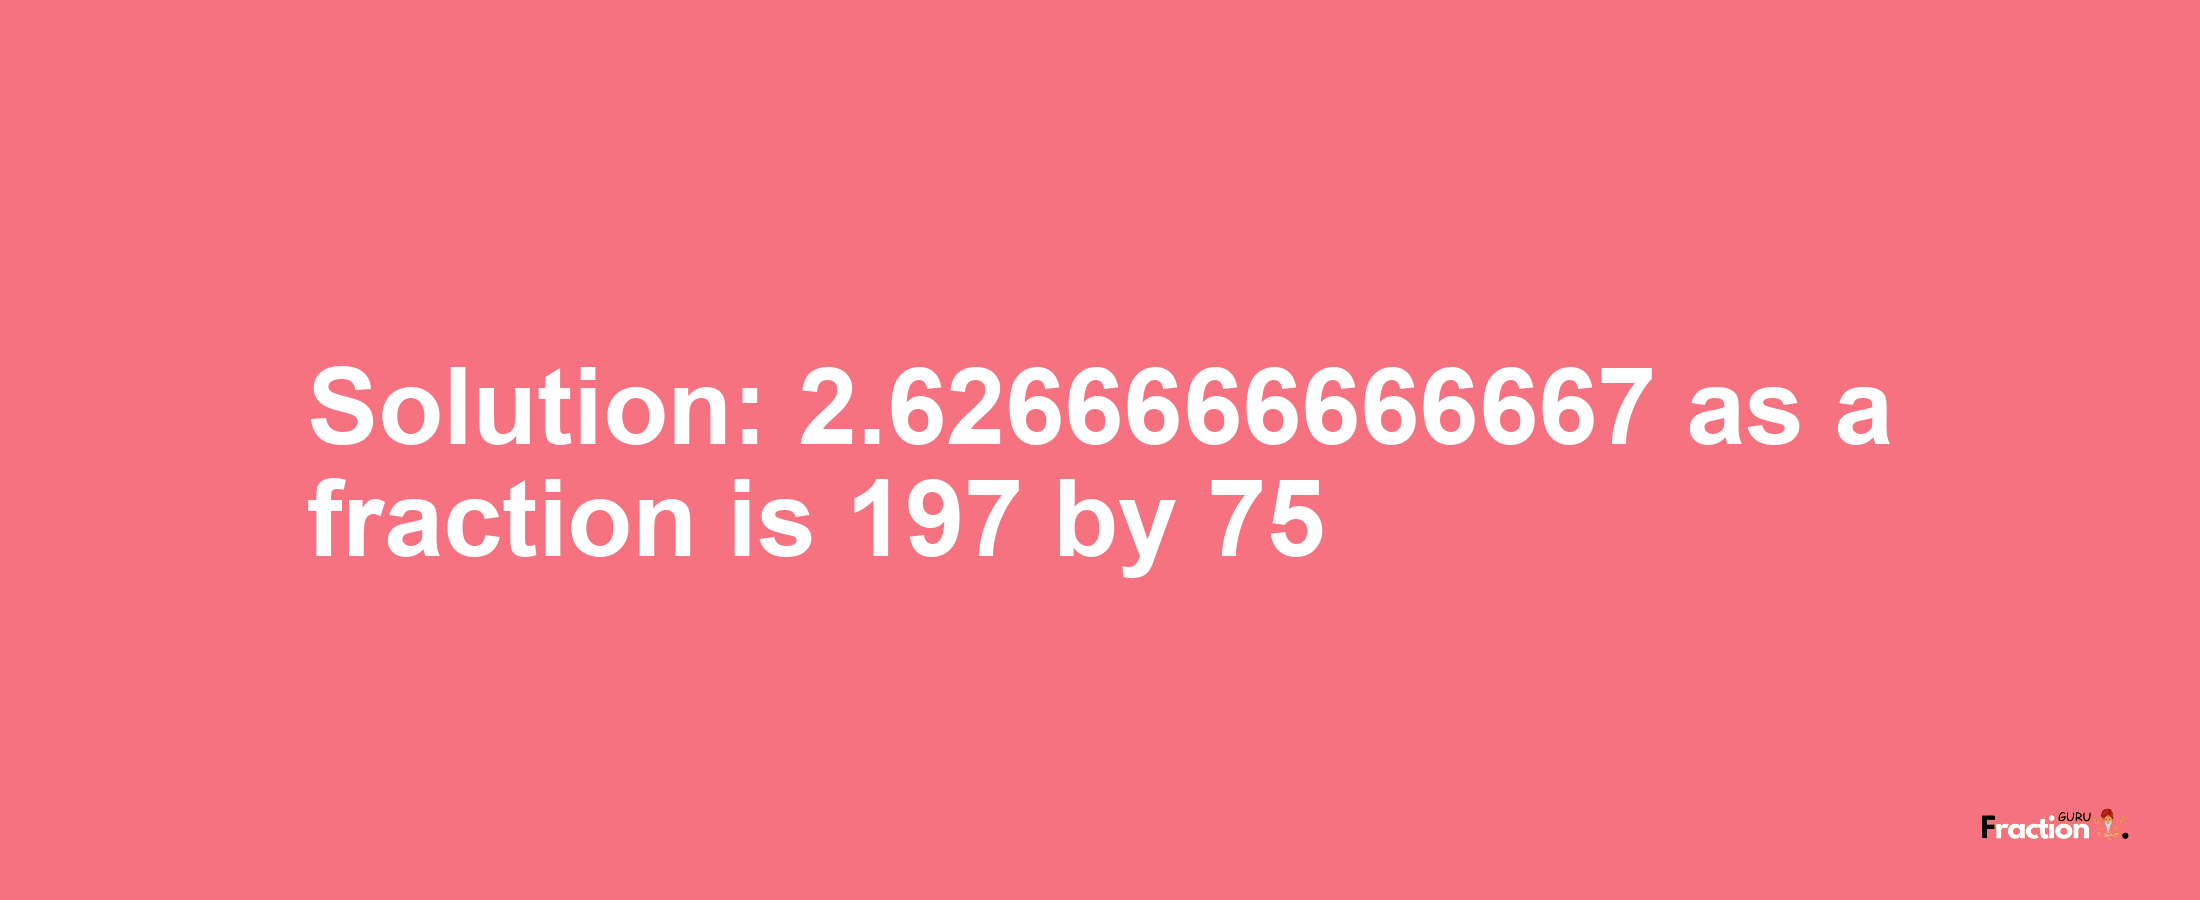 Solution:2.6266666666667 as a fraction is 197/75